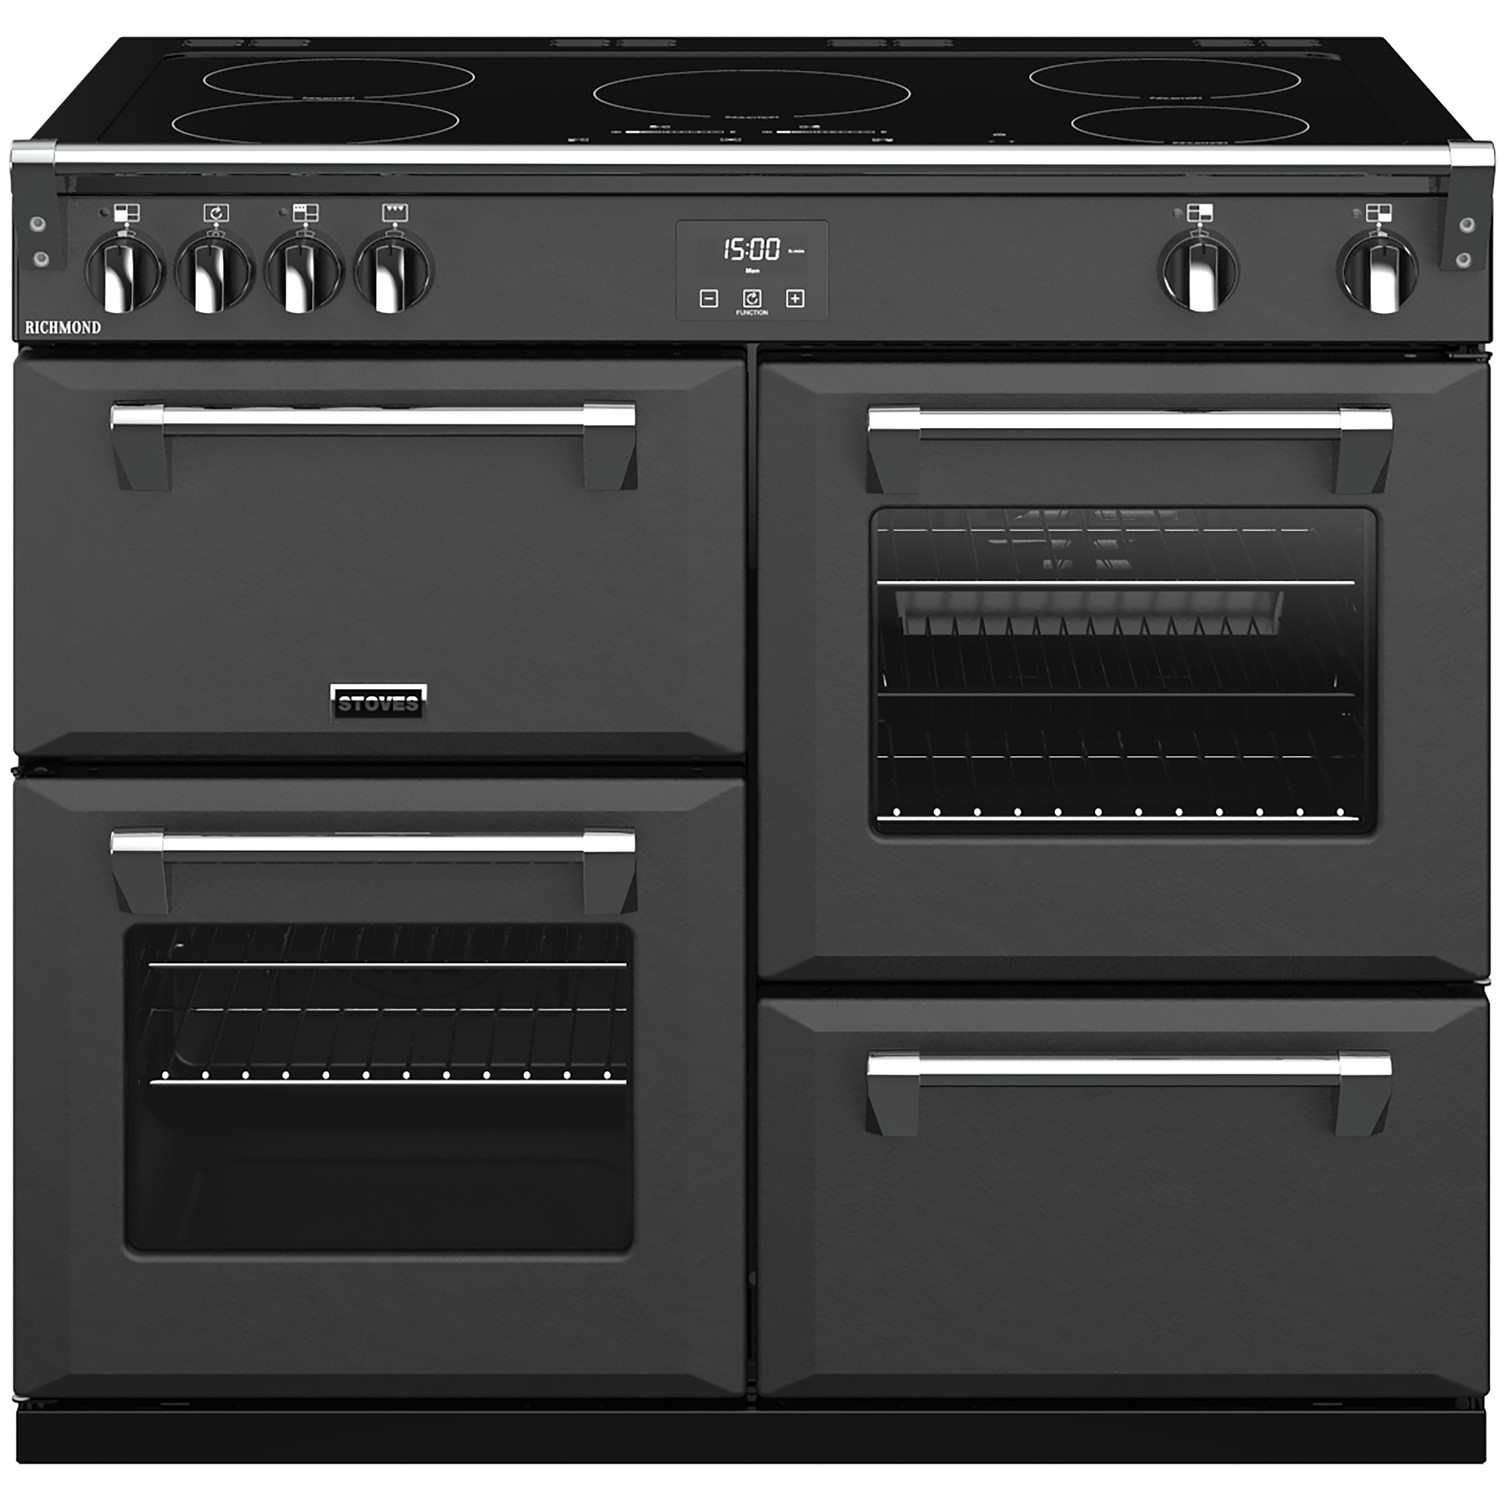 Stoves Richmond S1000Ei 100cm Electric Range Cooker With Induction Hob - Anthracite Grey